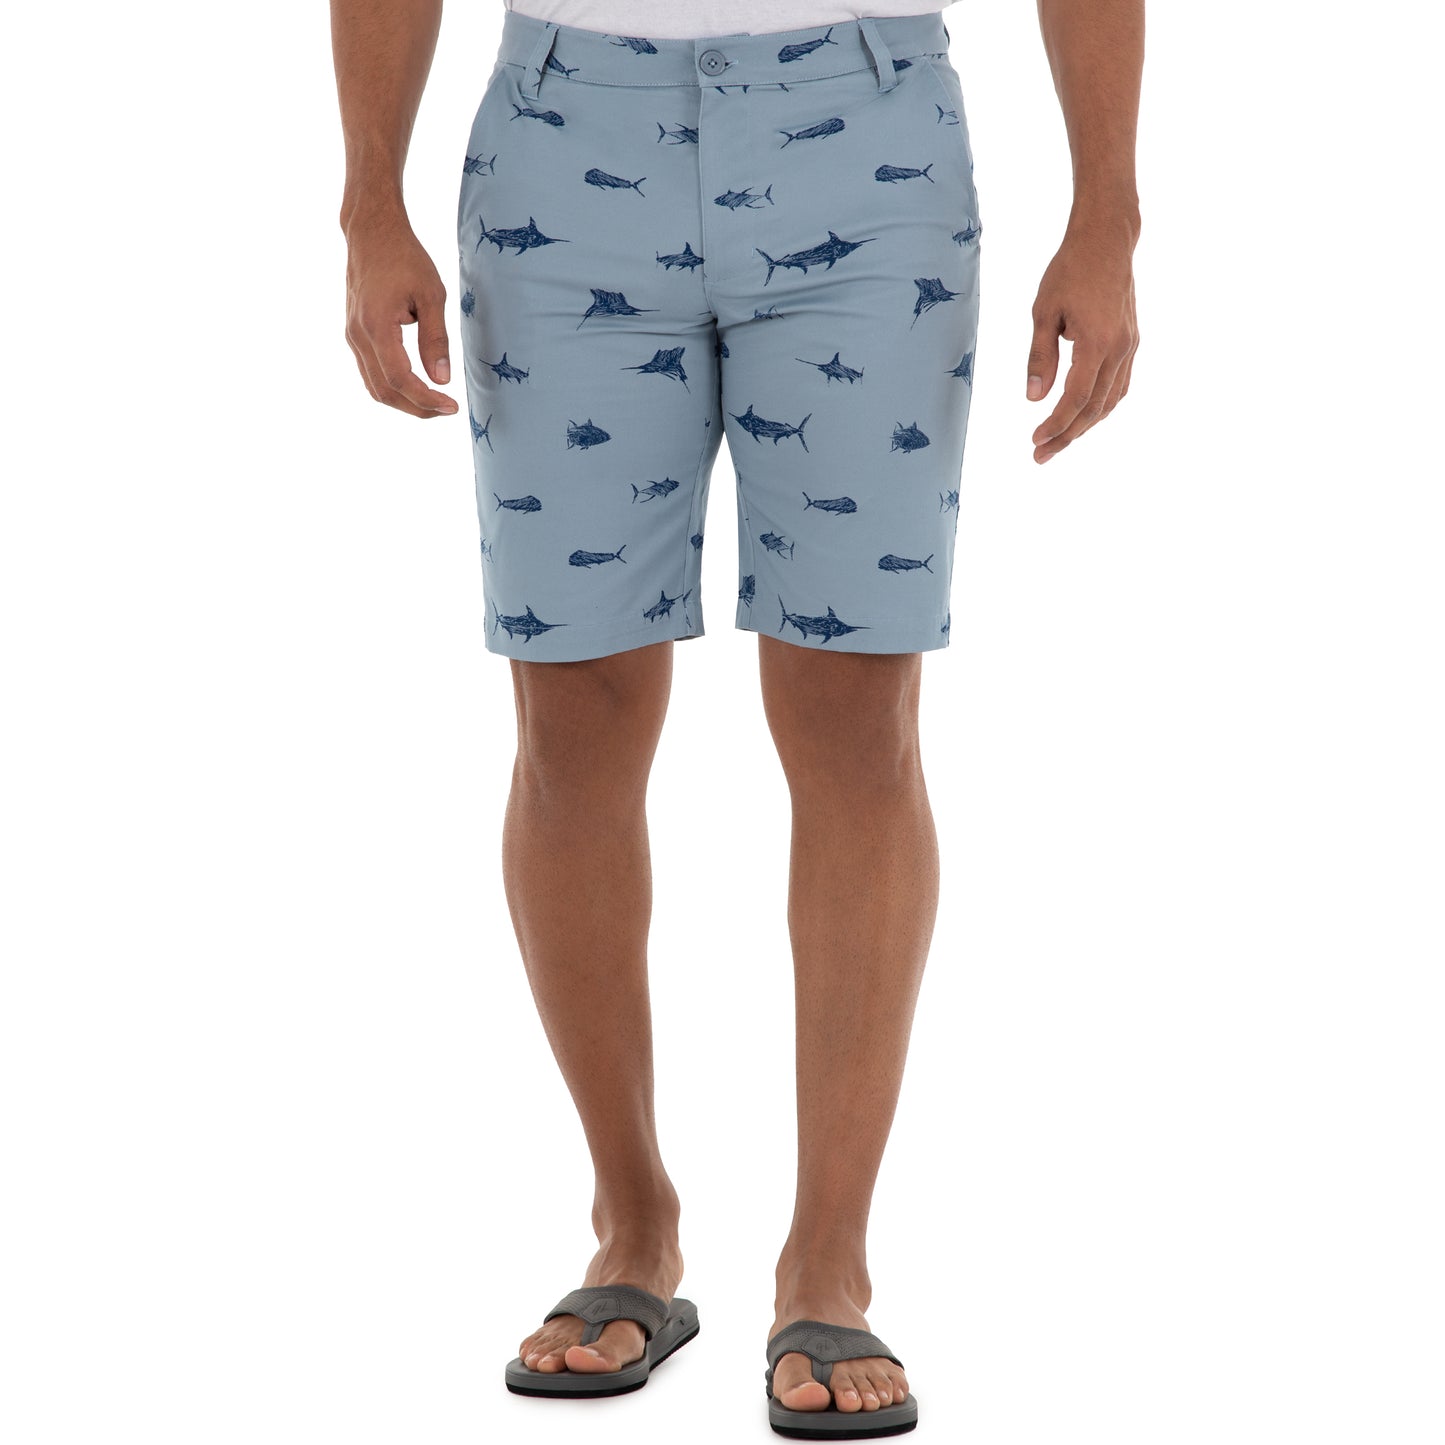 Men's 9" Performance Printed Blue Woven Short View 5